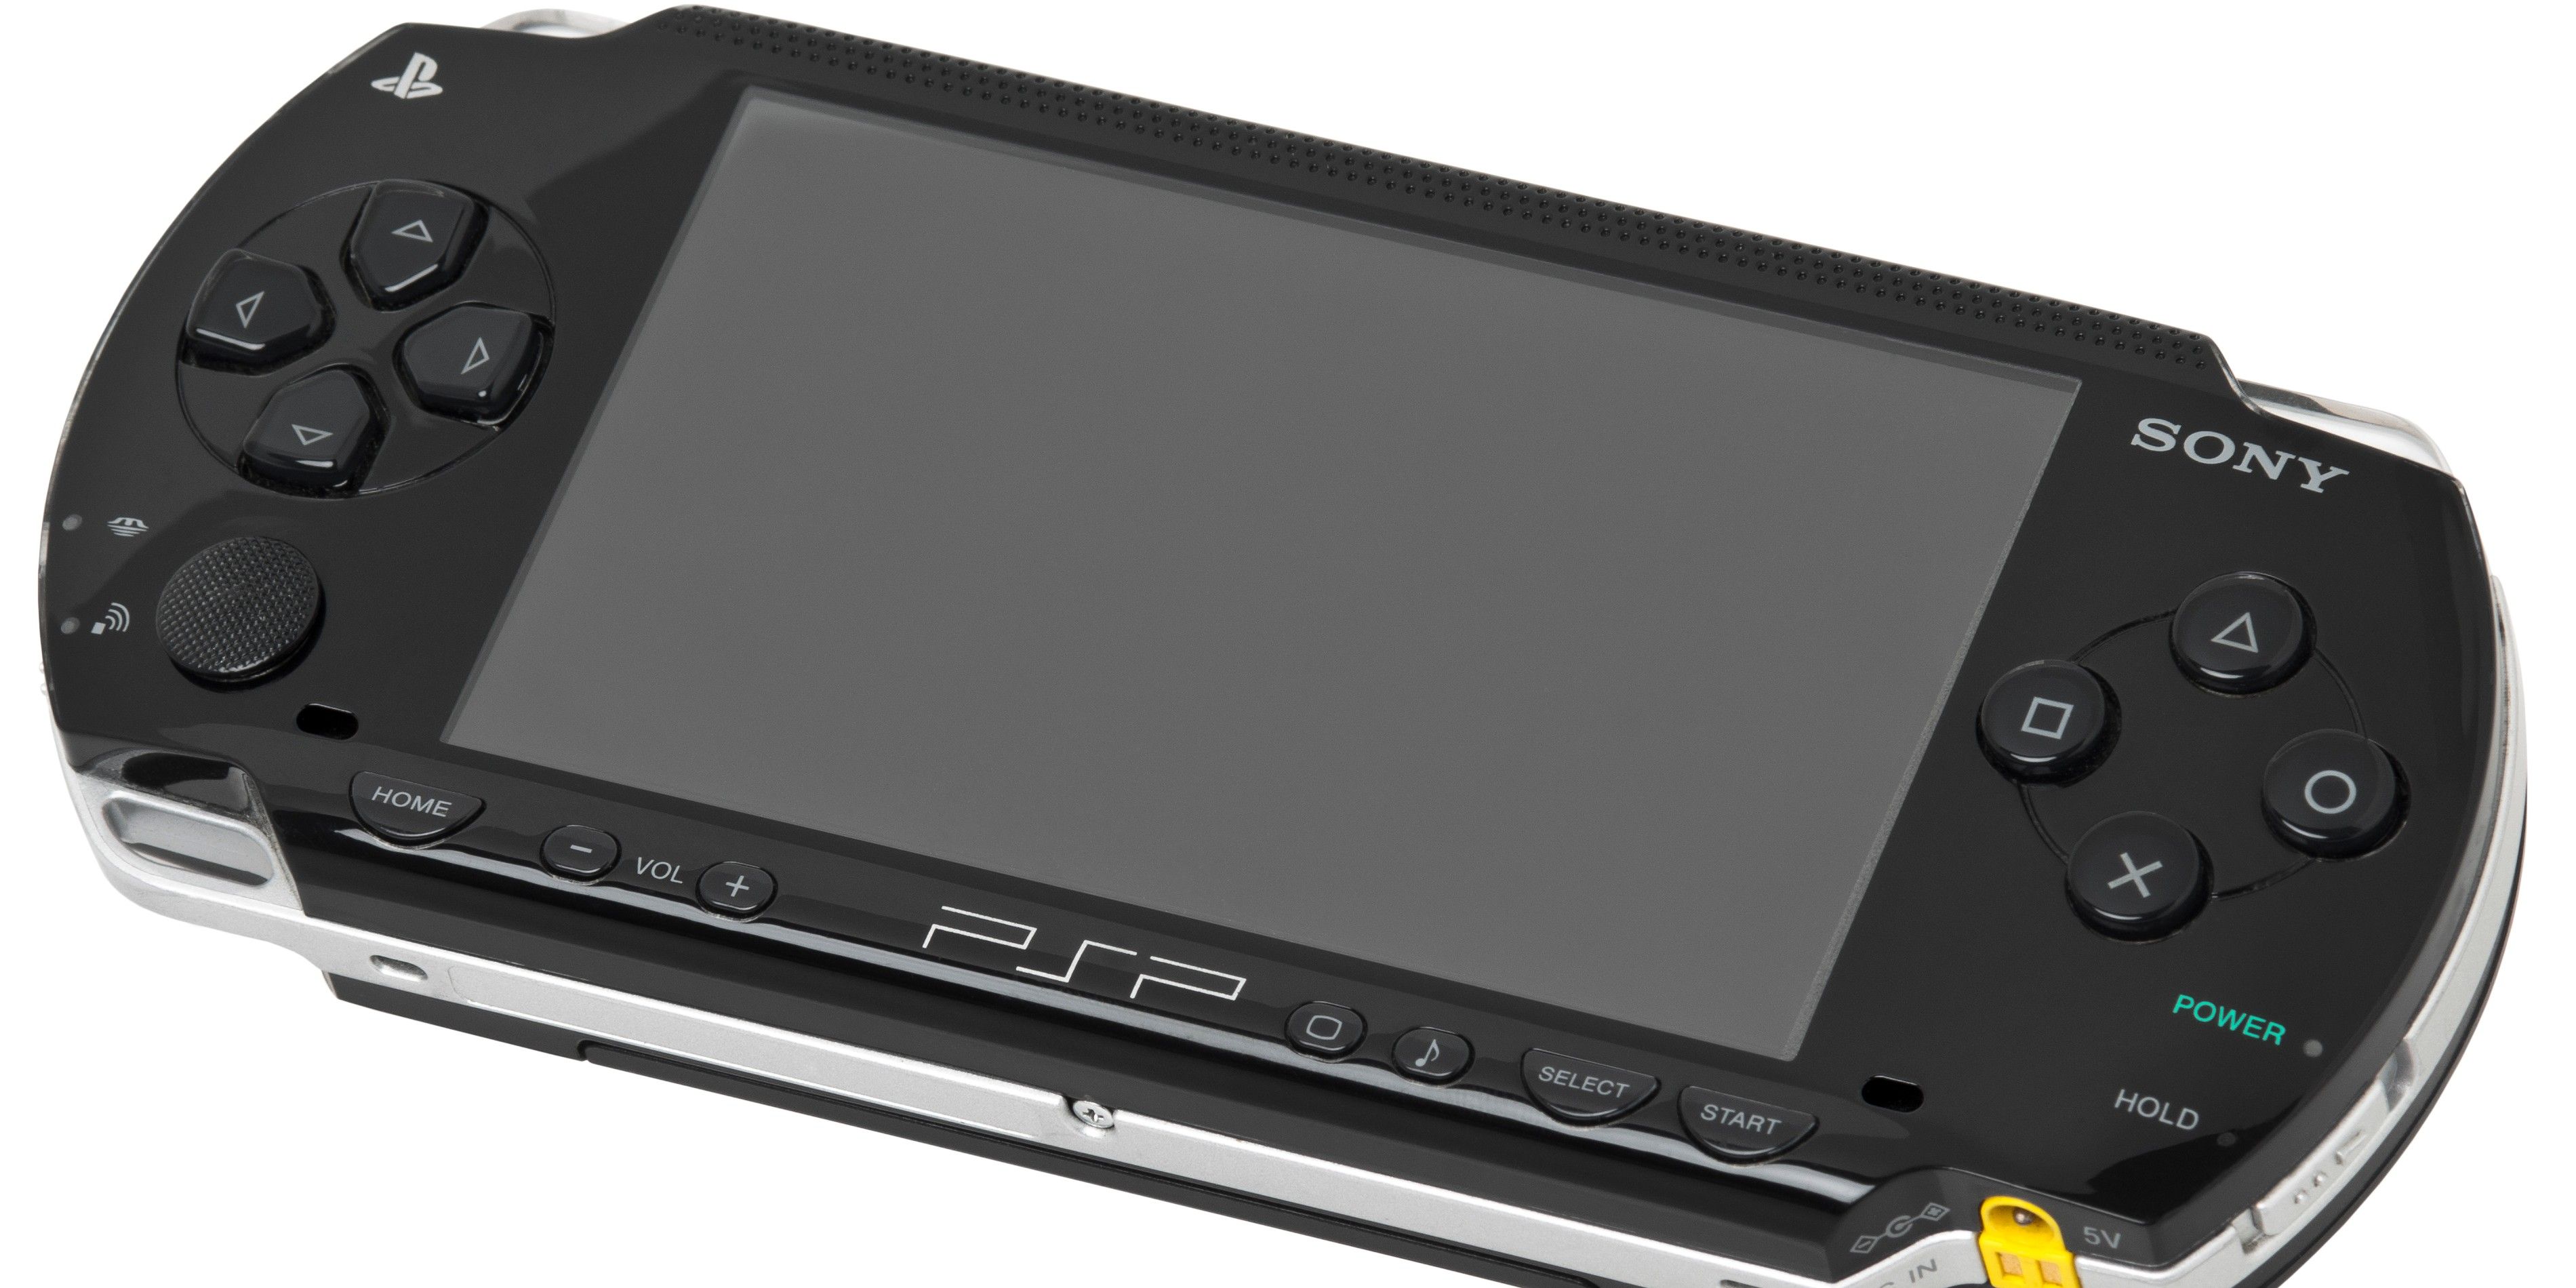 An image of the Sony PlayStation Portable handheld system.